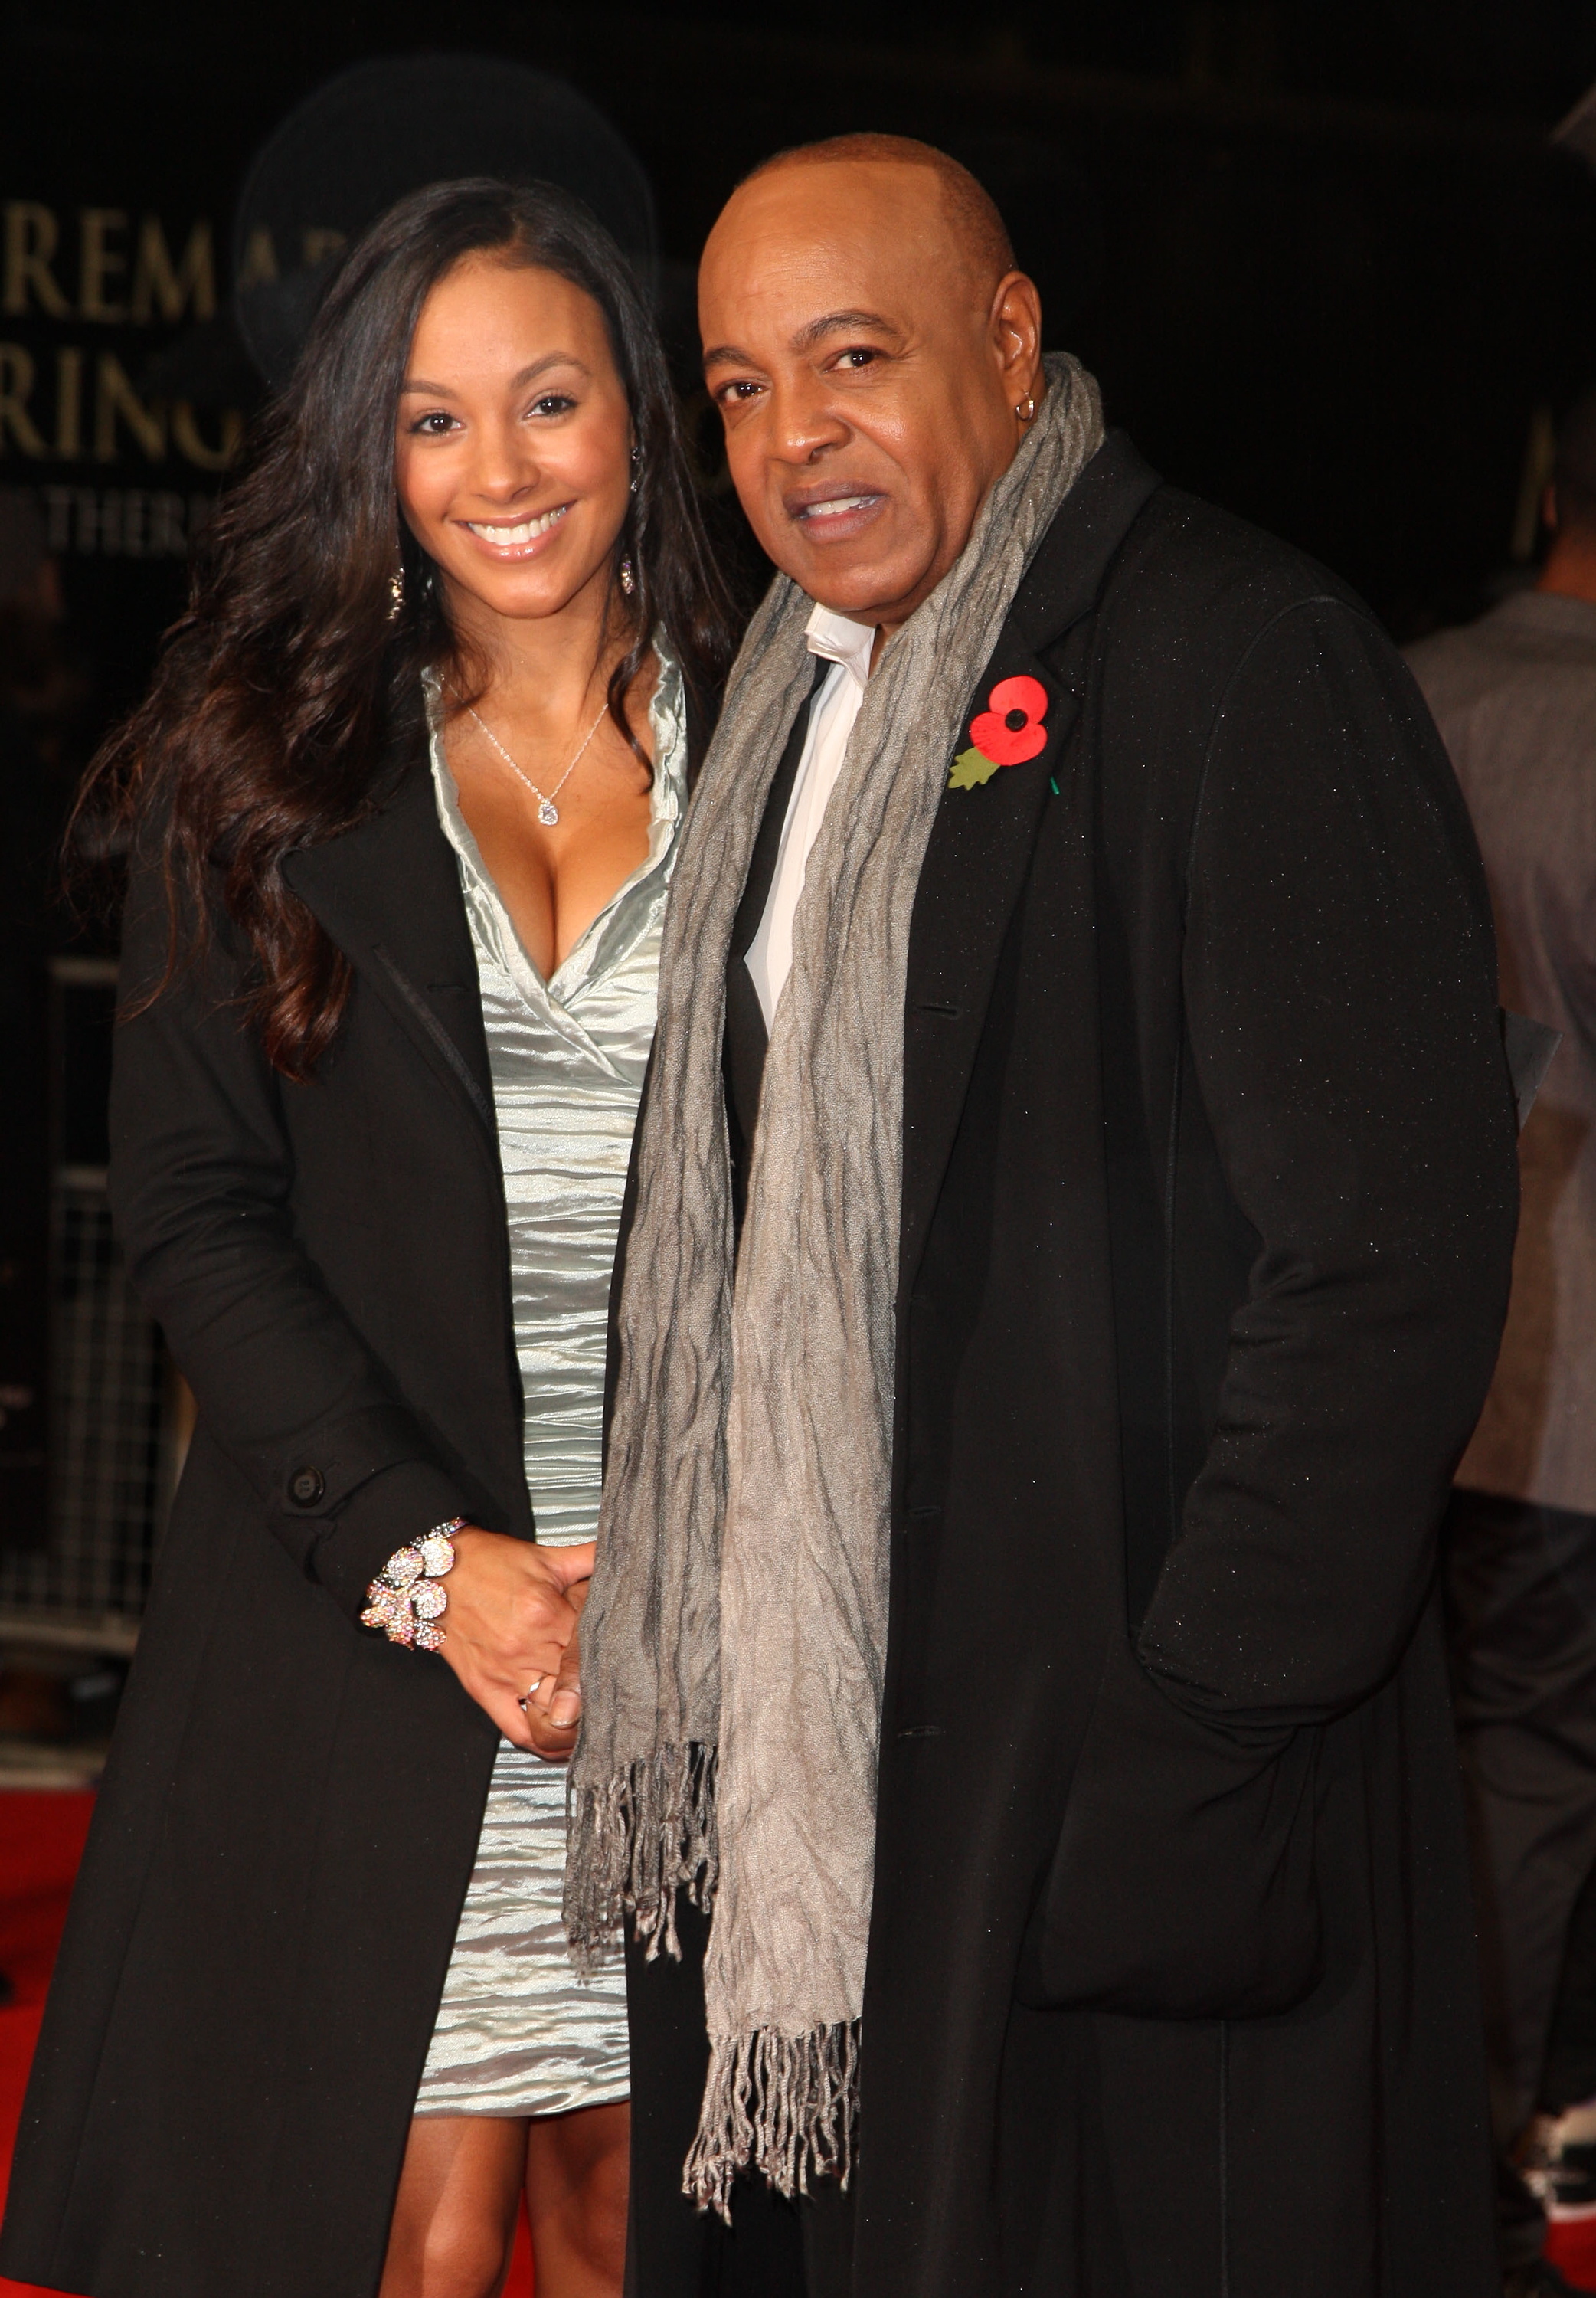 Peabo Bryson Son at Age 66 with Younger Wife 93.1 WZAK